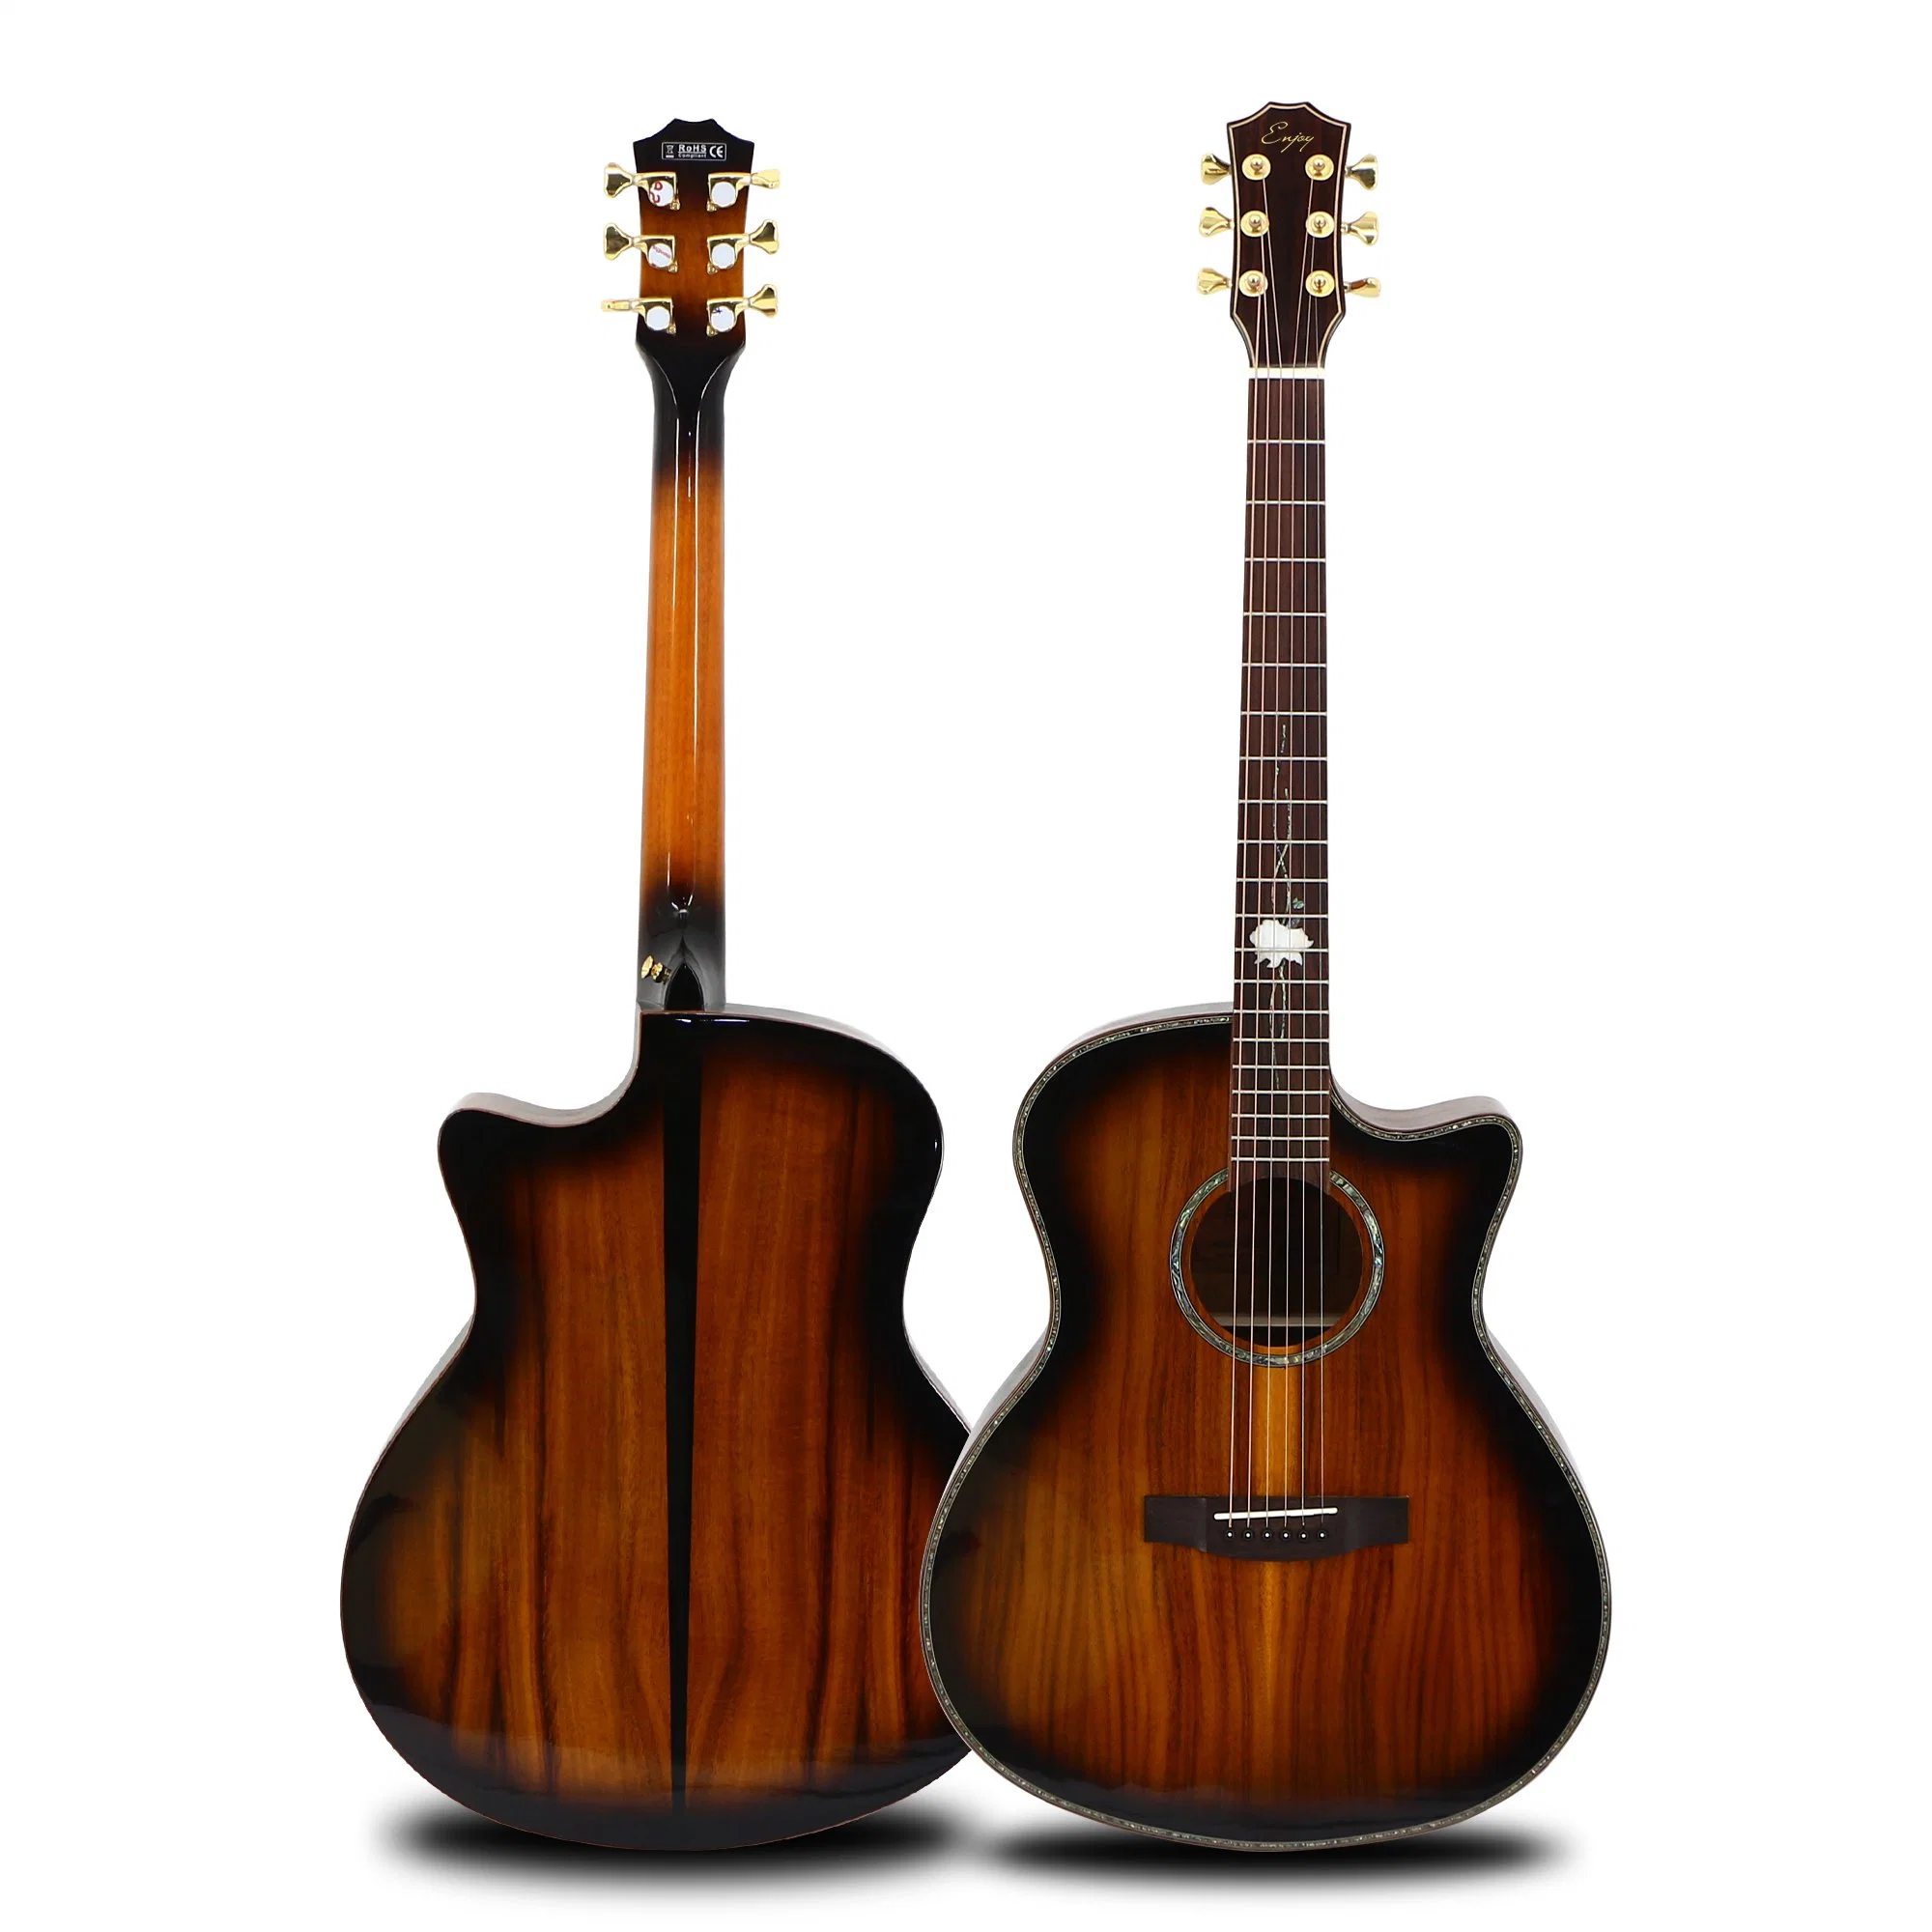 Chinese Factory Dadario String Rosewood Fingerboard Musical Instrument High Gloss Cutway High Quality Imported Solid Acacia 41inch Acoustic Guitar